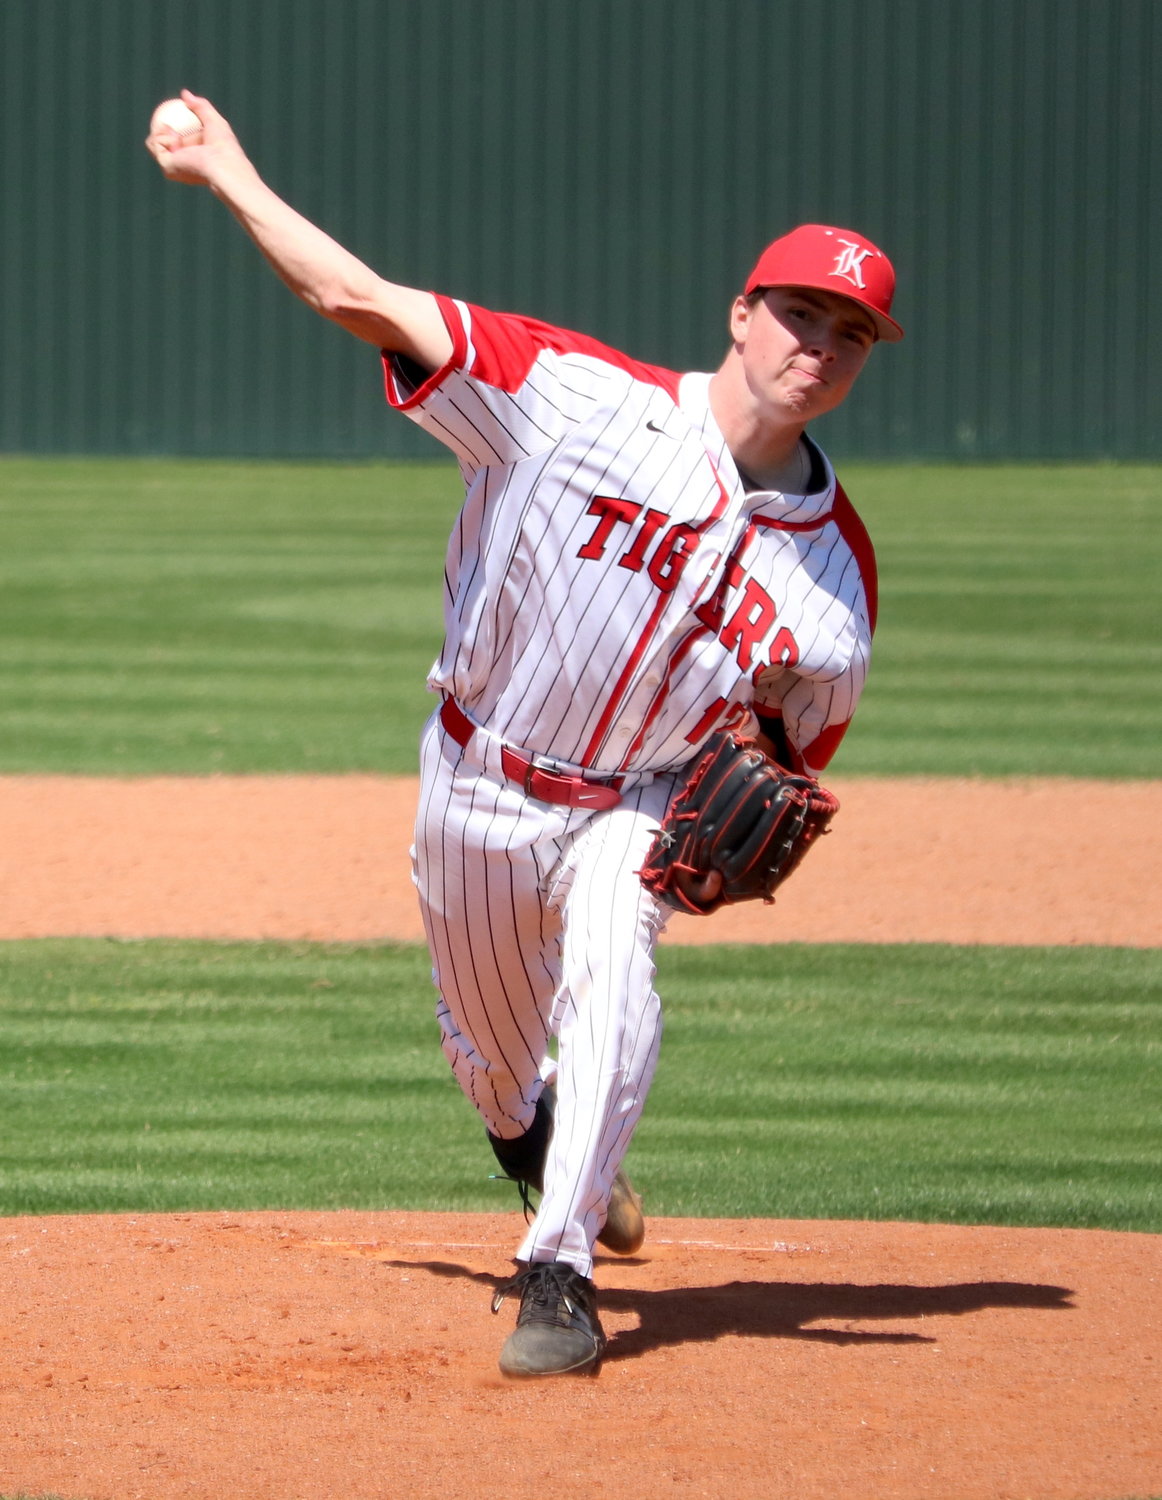 Lucas Moore pitches during Saturday's game between Katy and Jordan at the Katy baseball field.